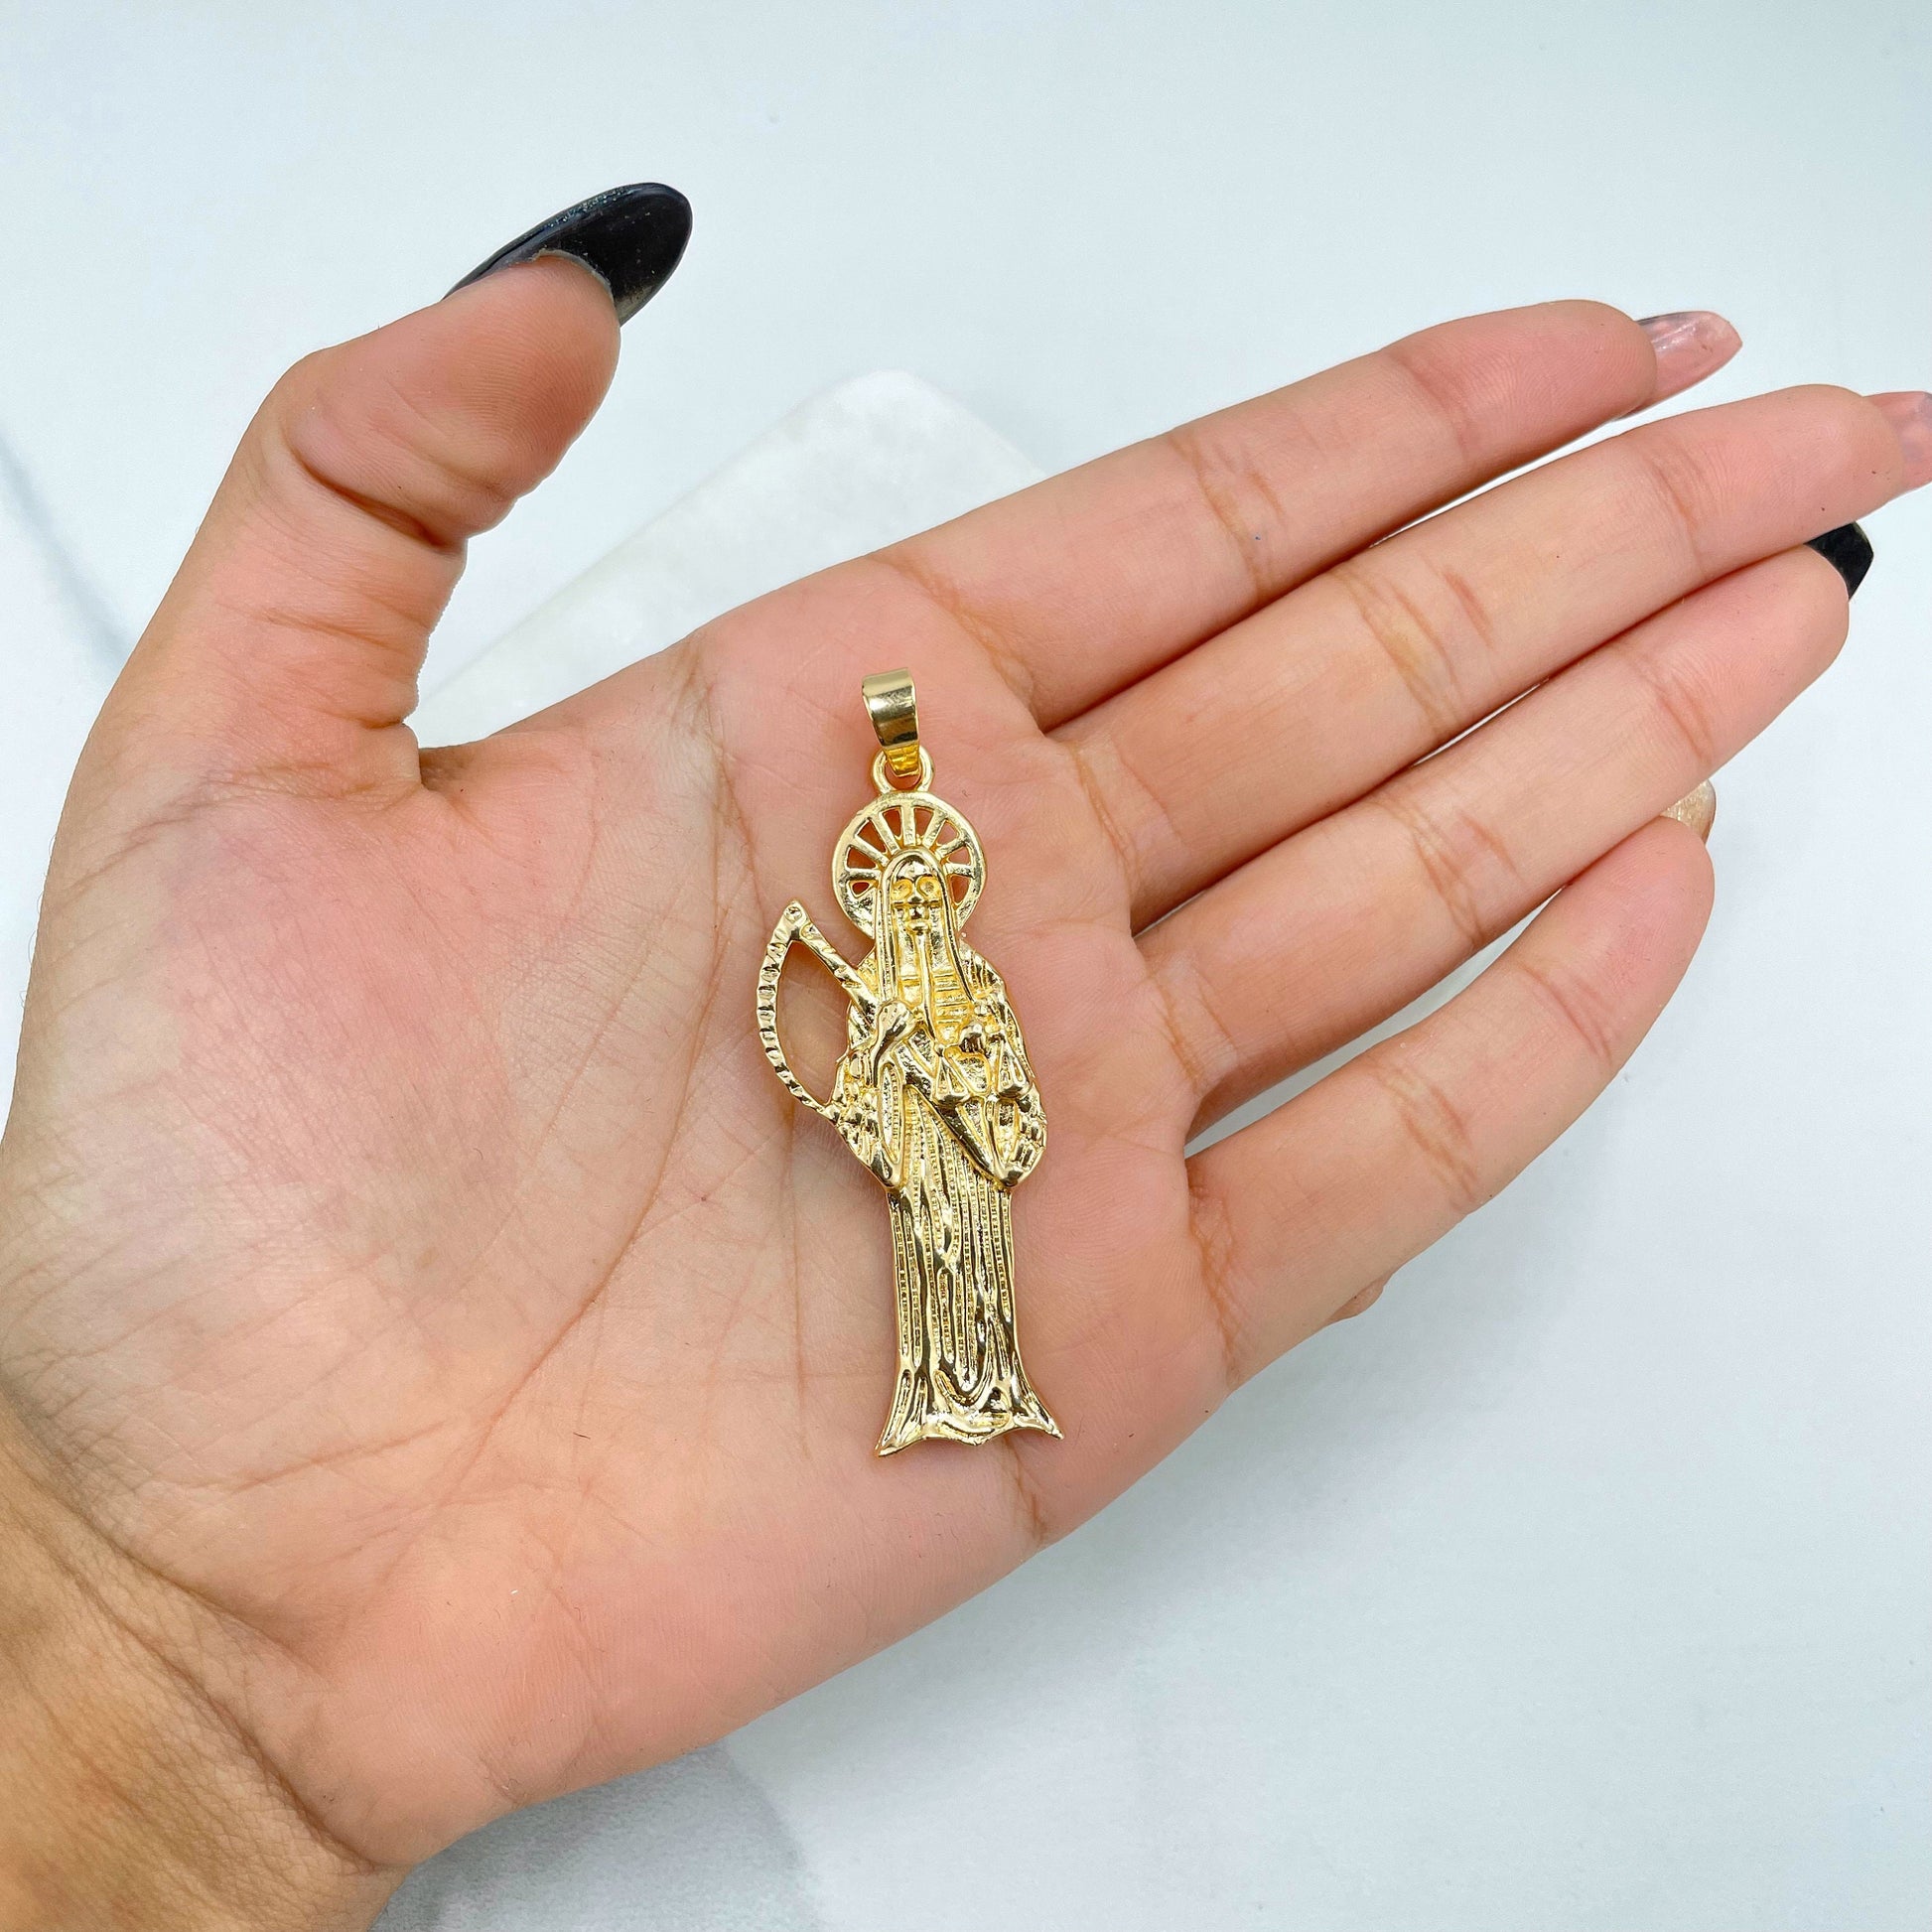 18k Gold Filled Santa Muerte, Grim Reaper Pendant Charms, Skeleton Religious Jewelry, Wholesale Jewelry Making Supplies